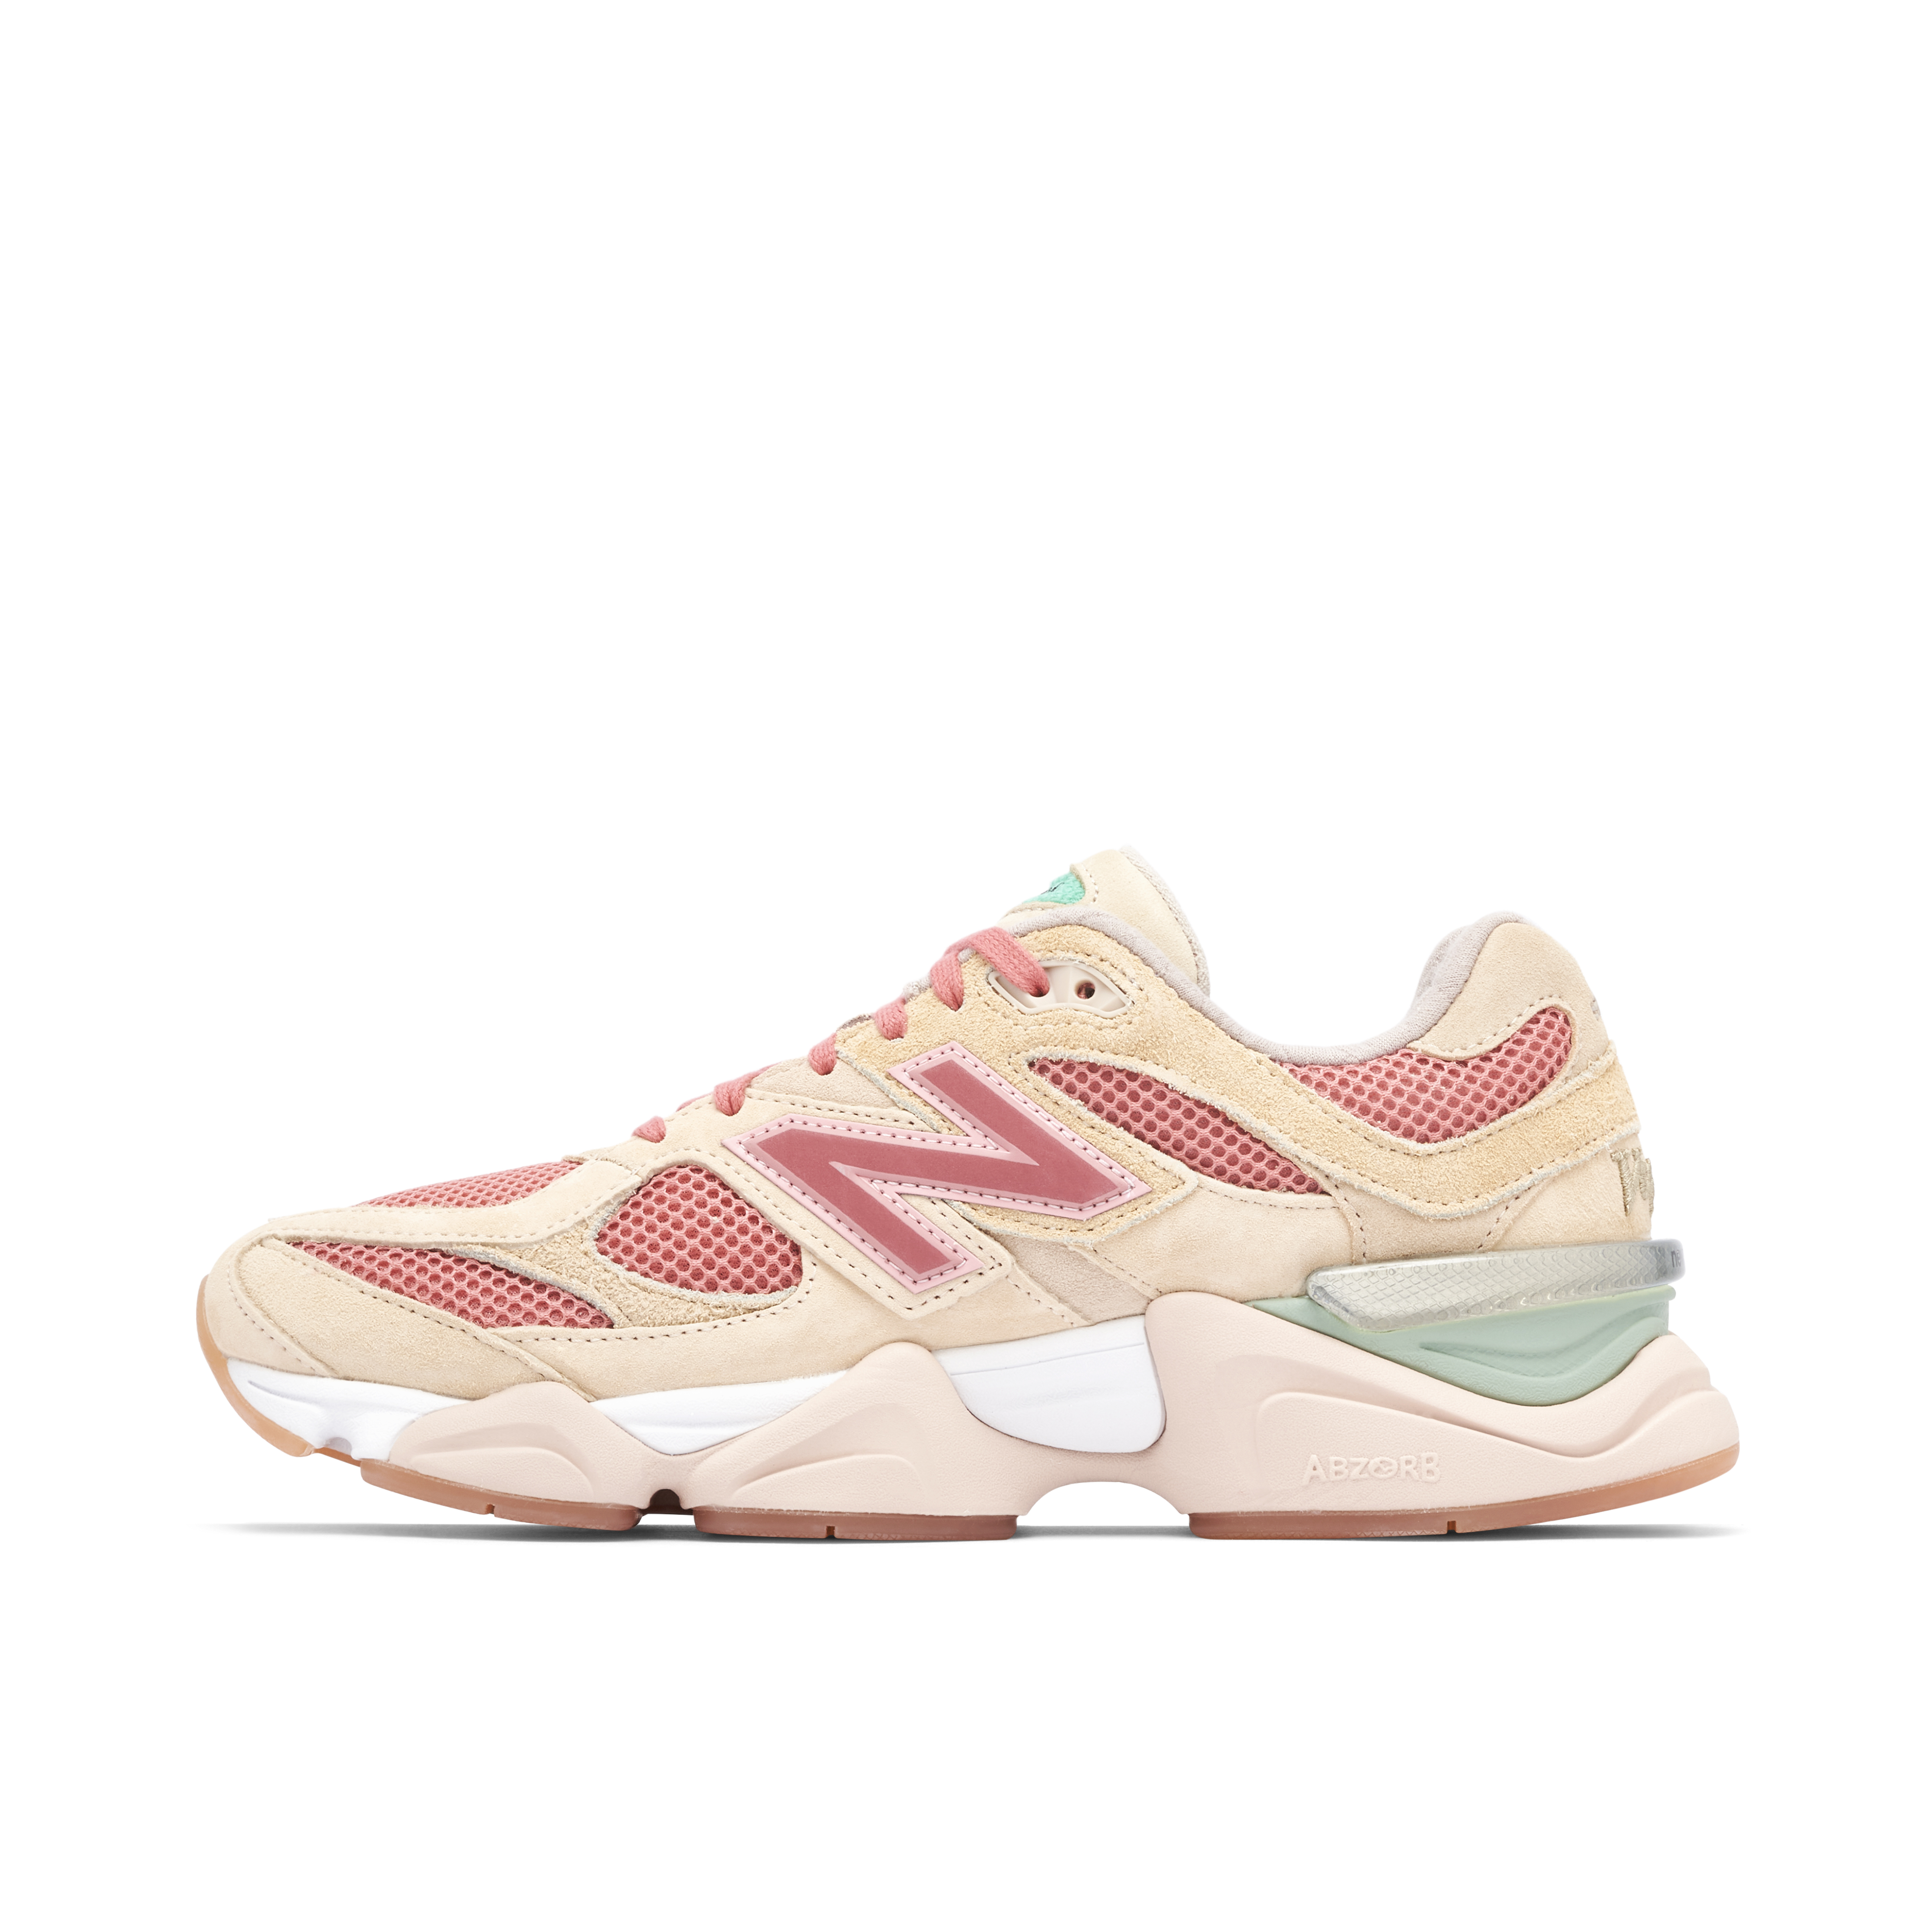 New Balance 9060 x Joe Freshgoods Inside Voices Penny Cookie Pink 